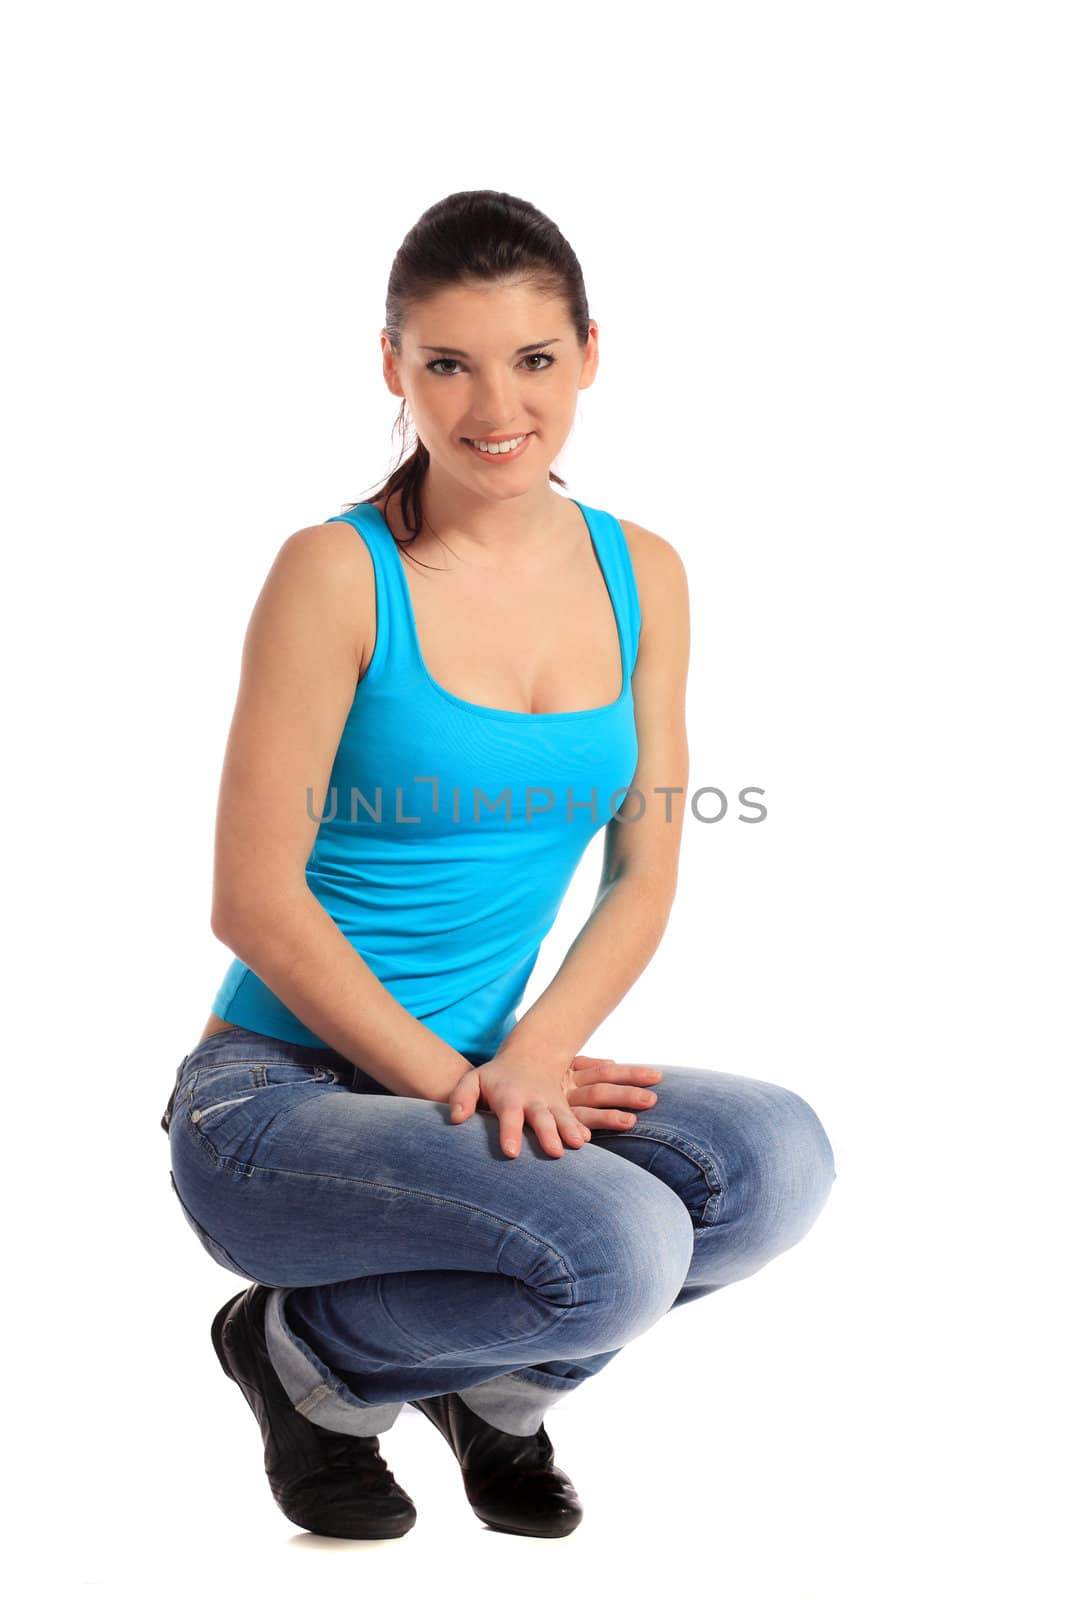 Attractive young woman in squatting position. All on white background.